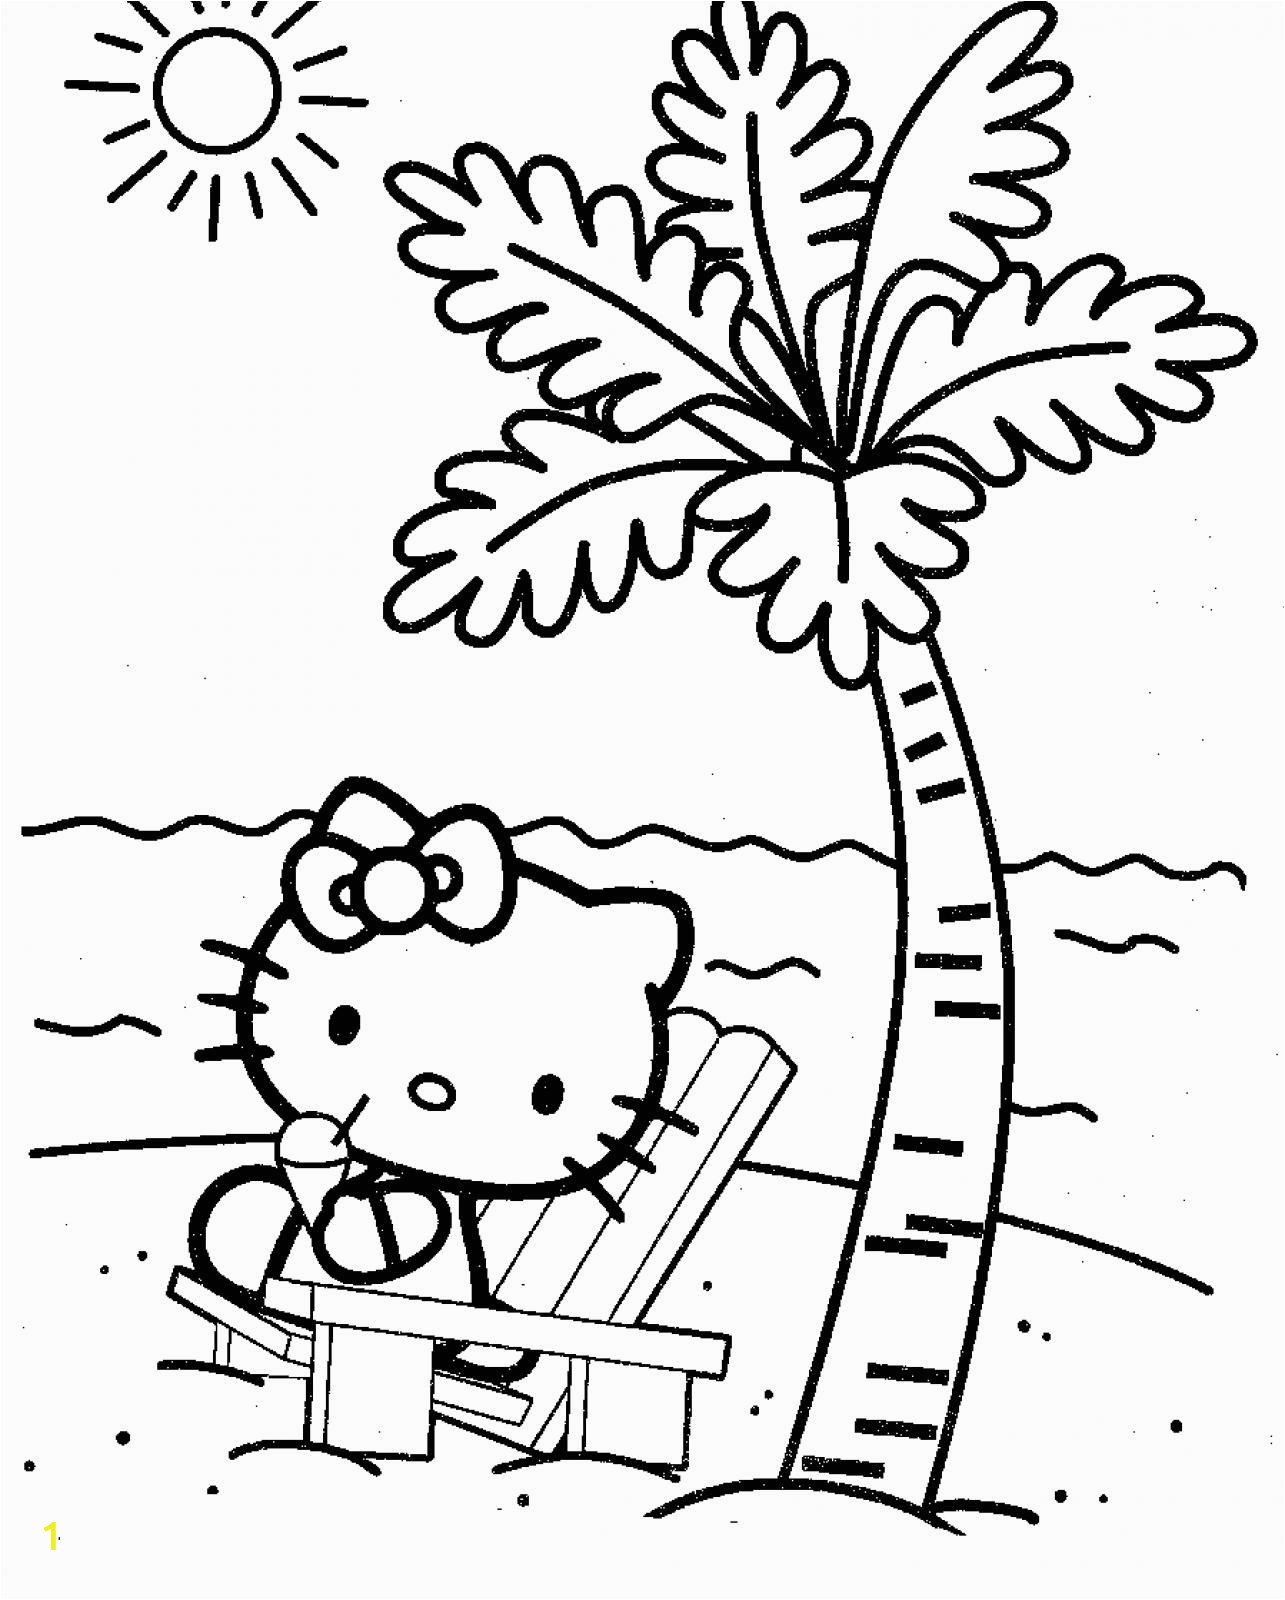 Hello Kitty Coloring Pages Preschool top 75 Free Printable Hello Kitty Coloring Pages Line